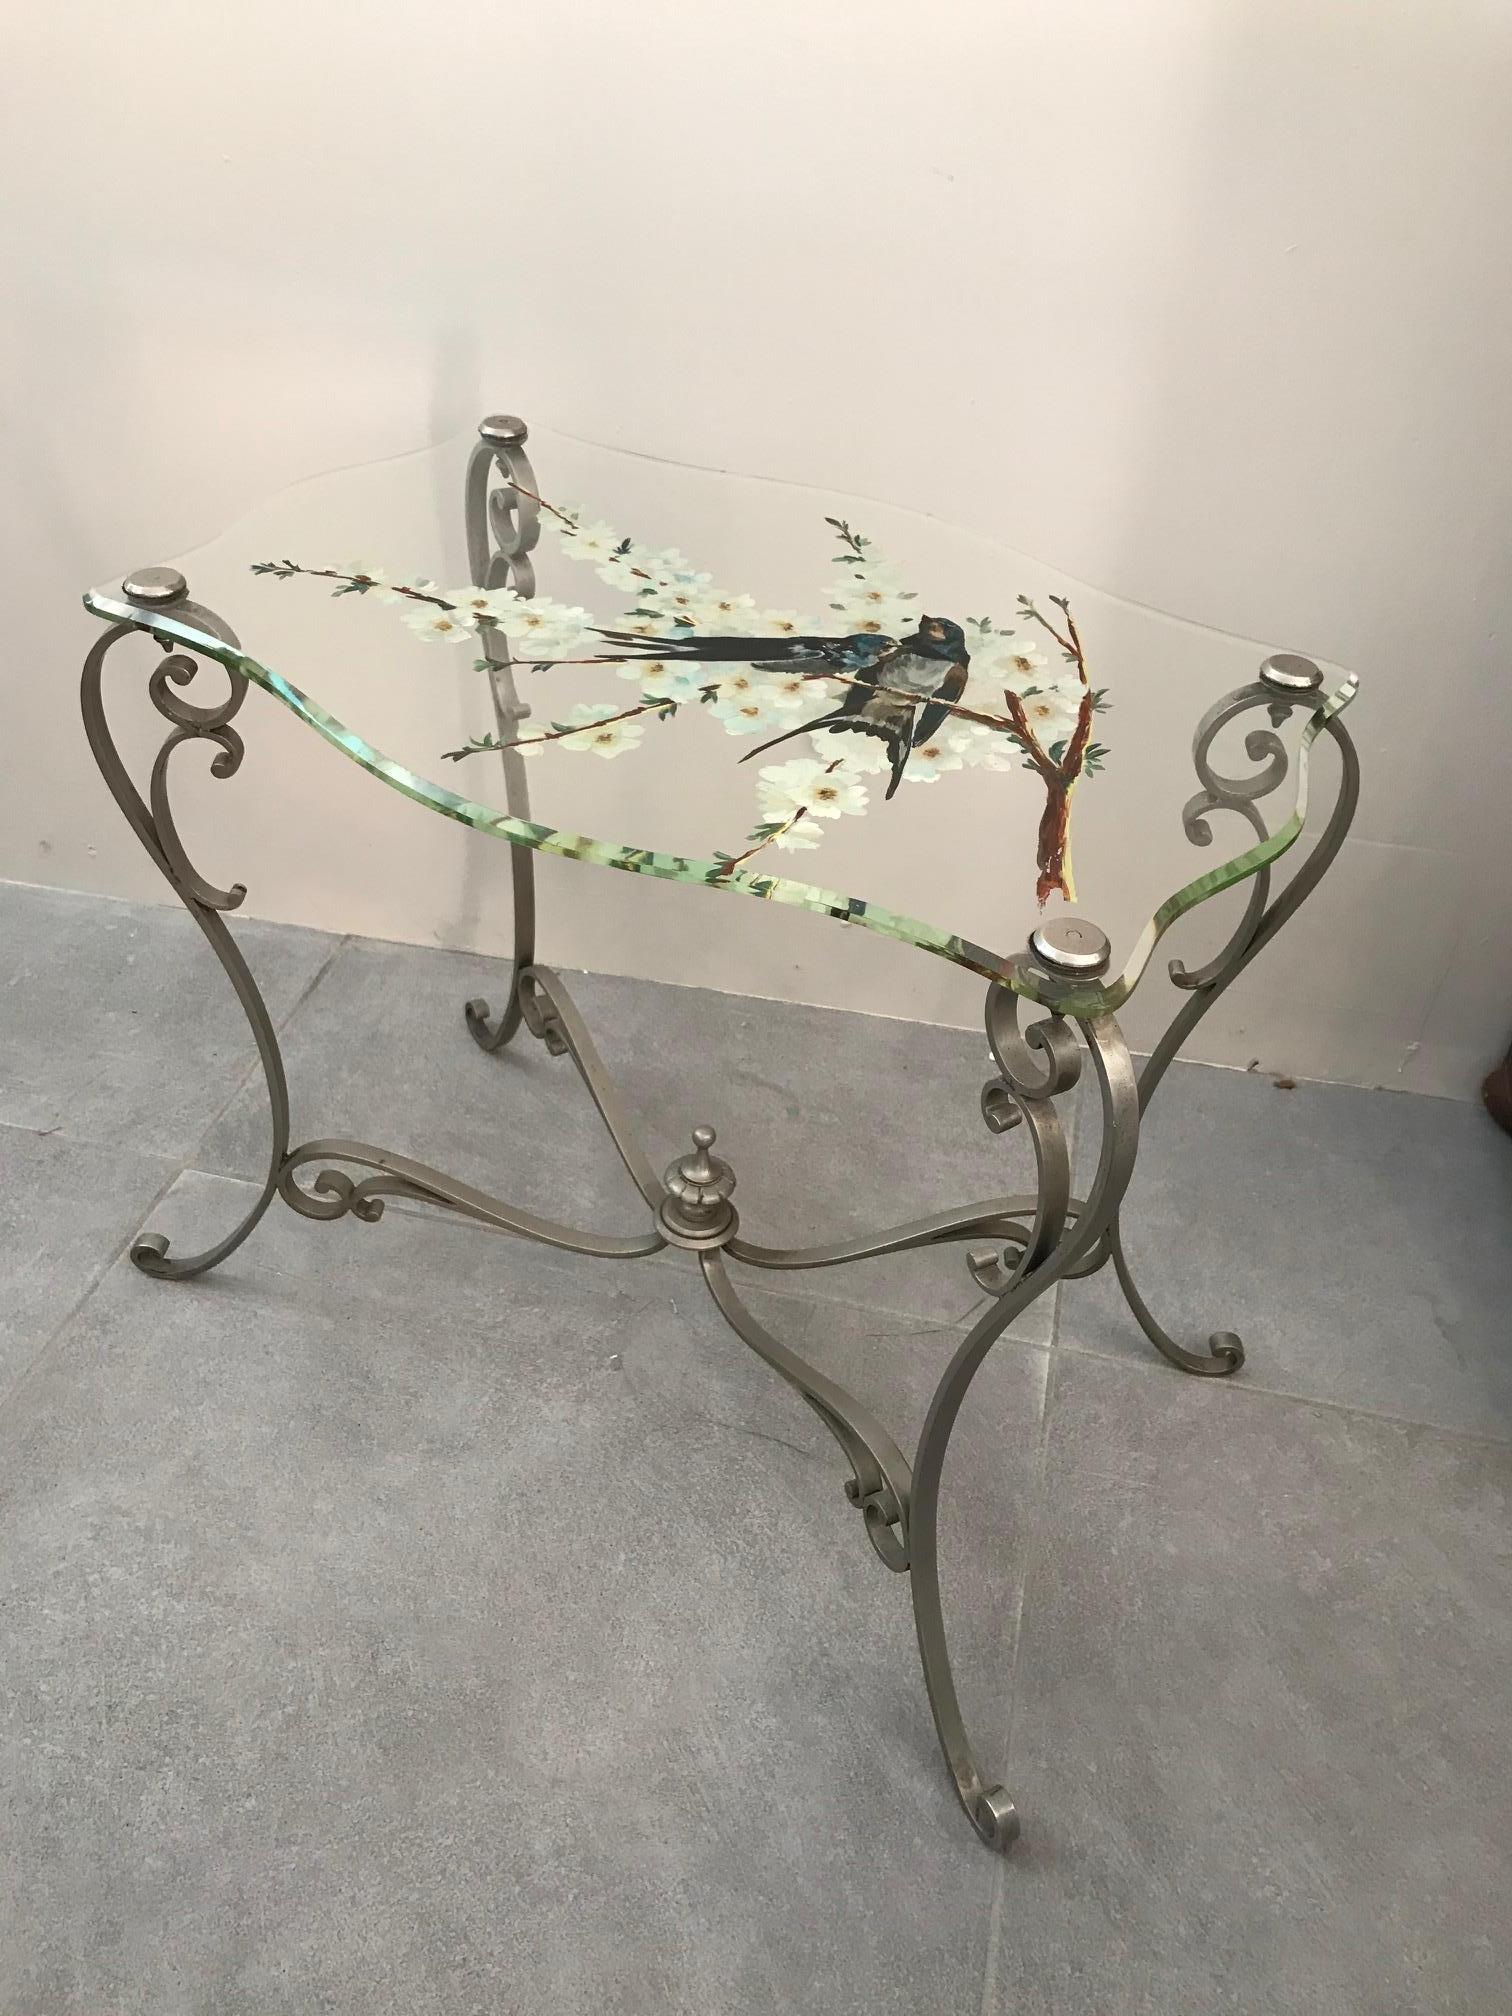 Beautiful 20th century French painted glass and metal coffee table from the 1950s.
Very nice flowers and birds decoration painting on the top.
Very good condition. Rare item.